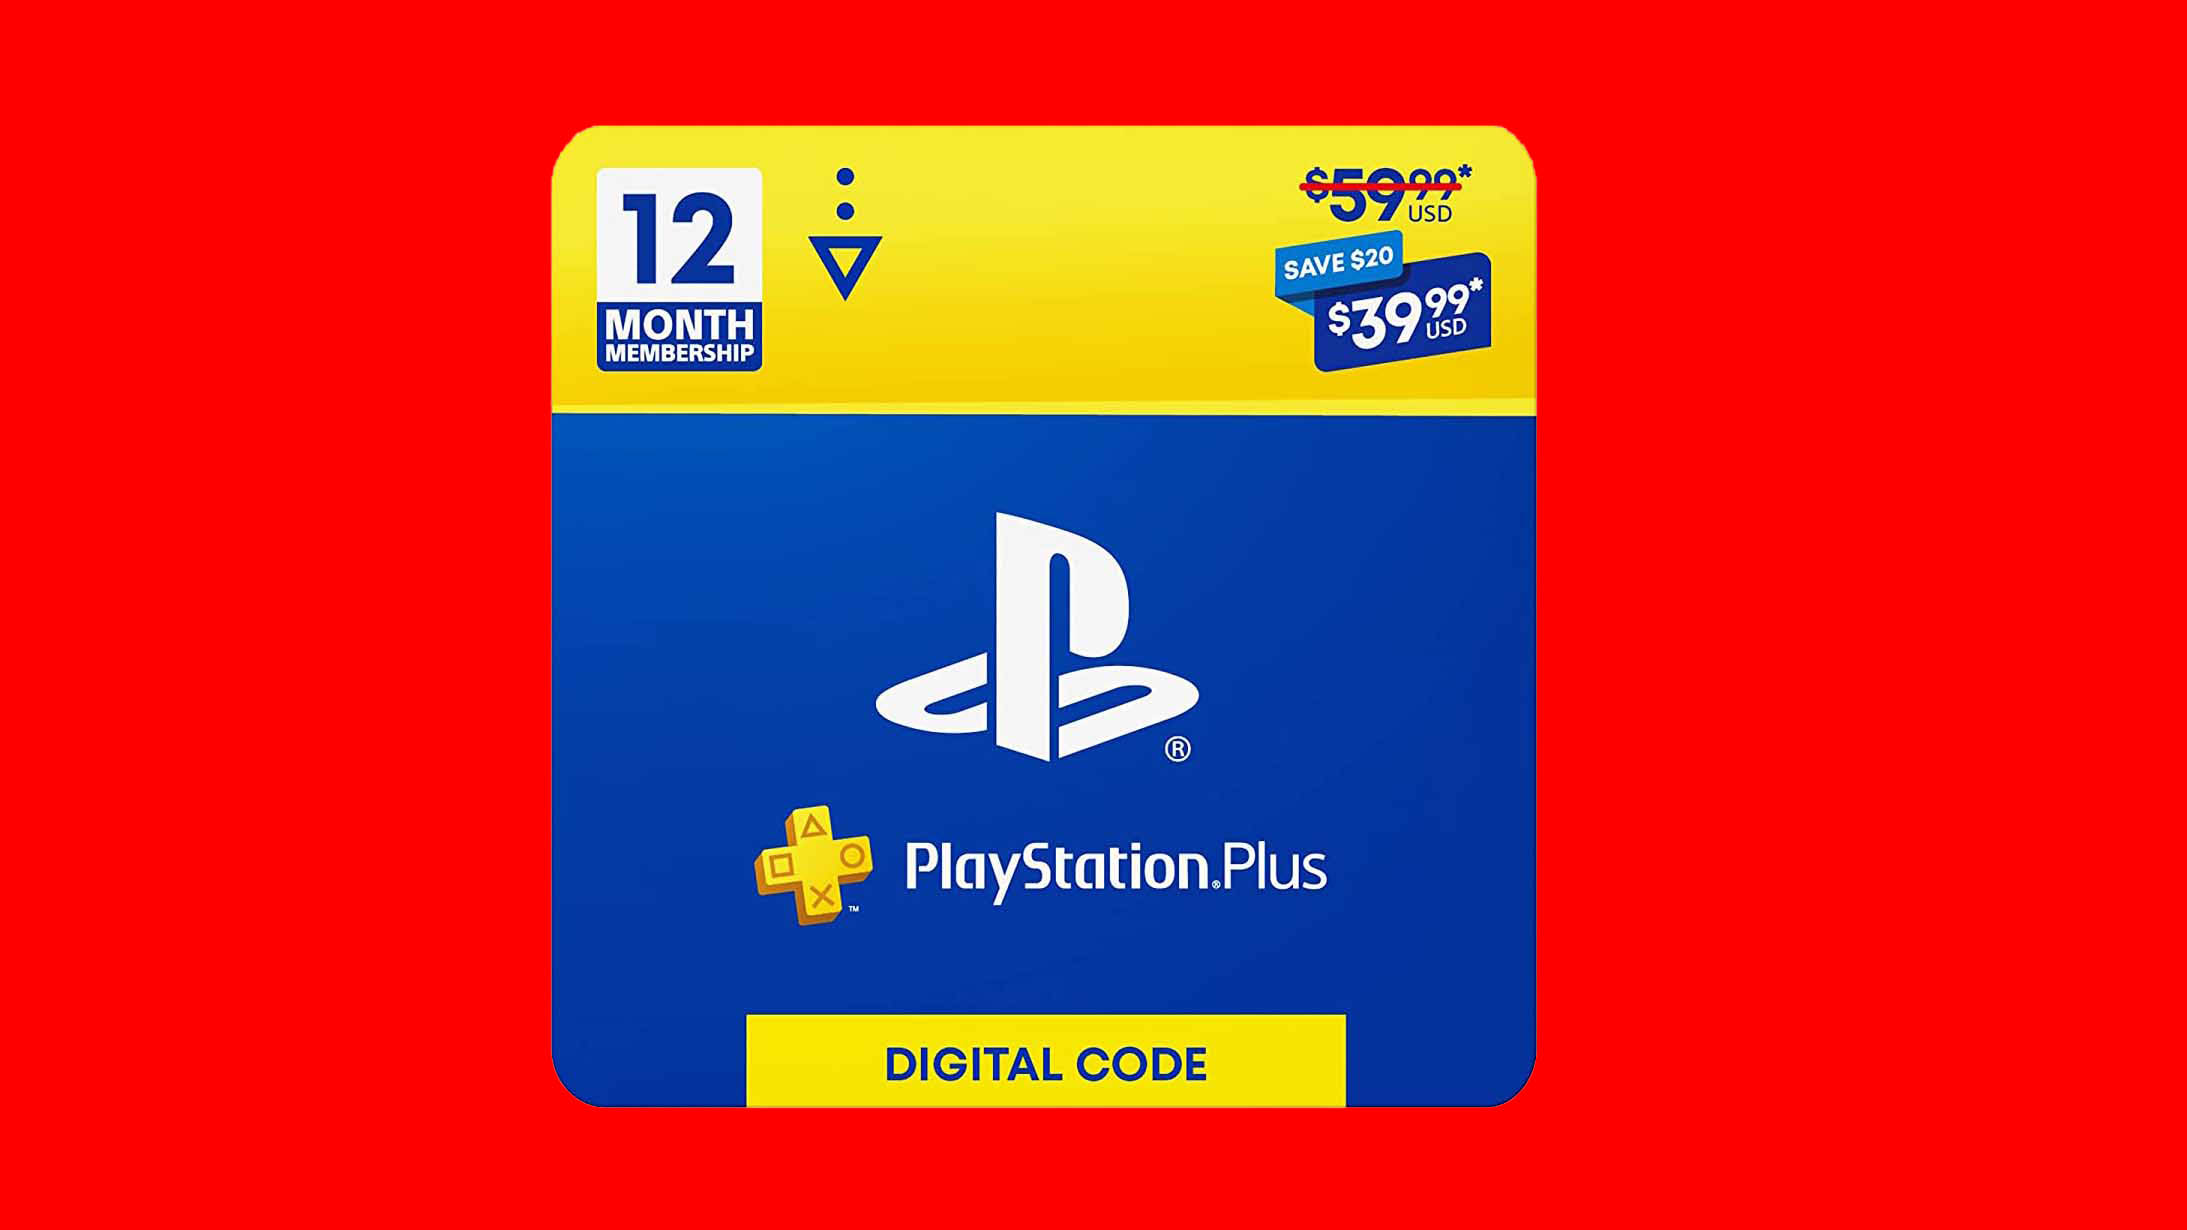 Kæreste tidligste Allerede This incredible PS Plus sale is the best early Black Friday deal so far